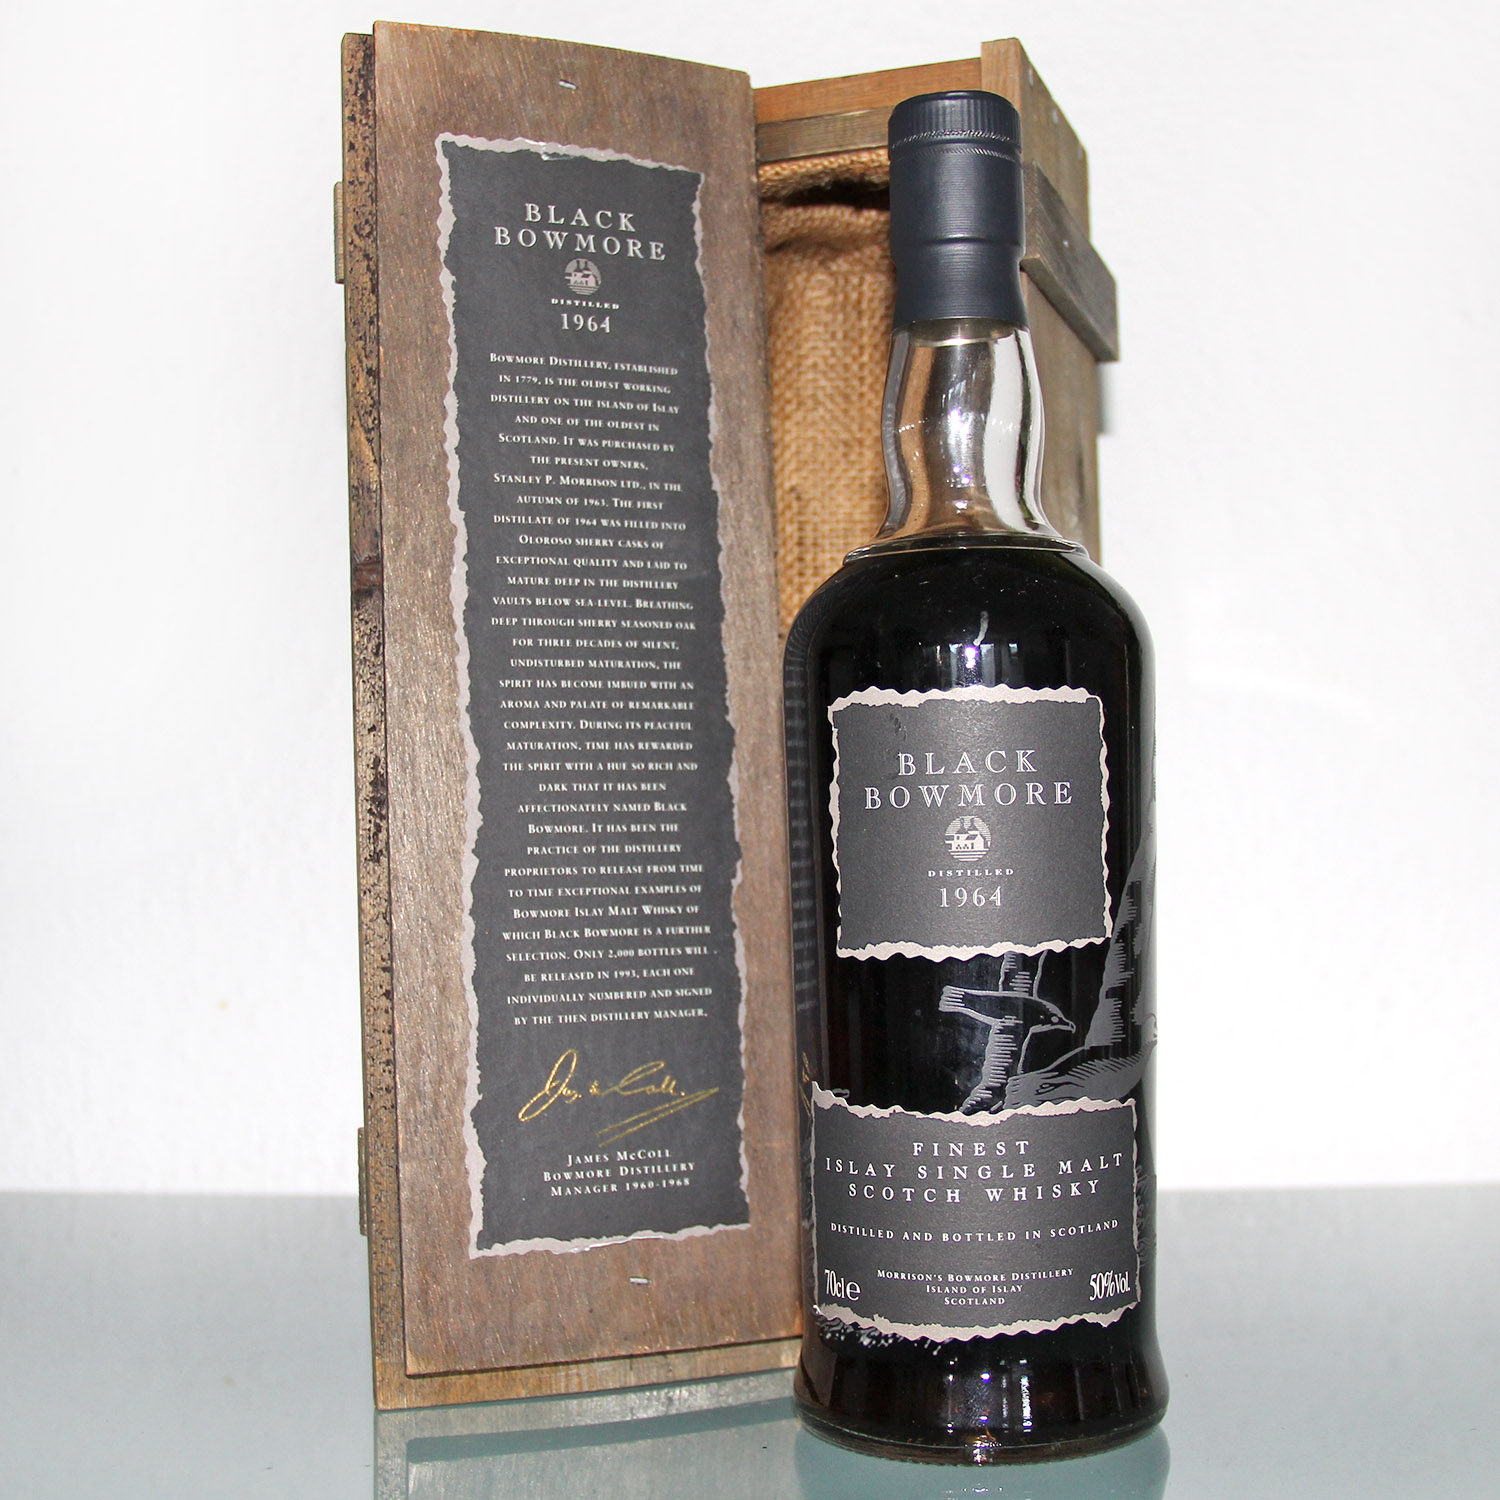 Black Bowmore 1964 29 Years Old 1st Edition box